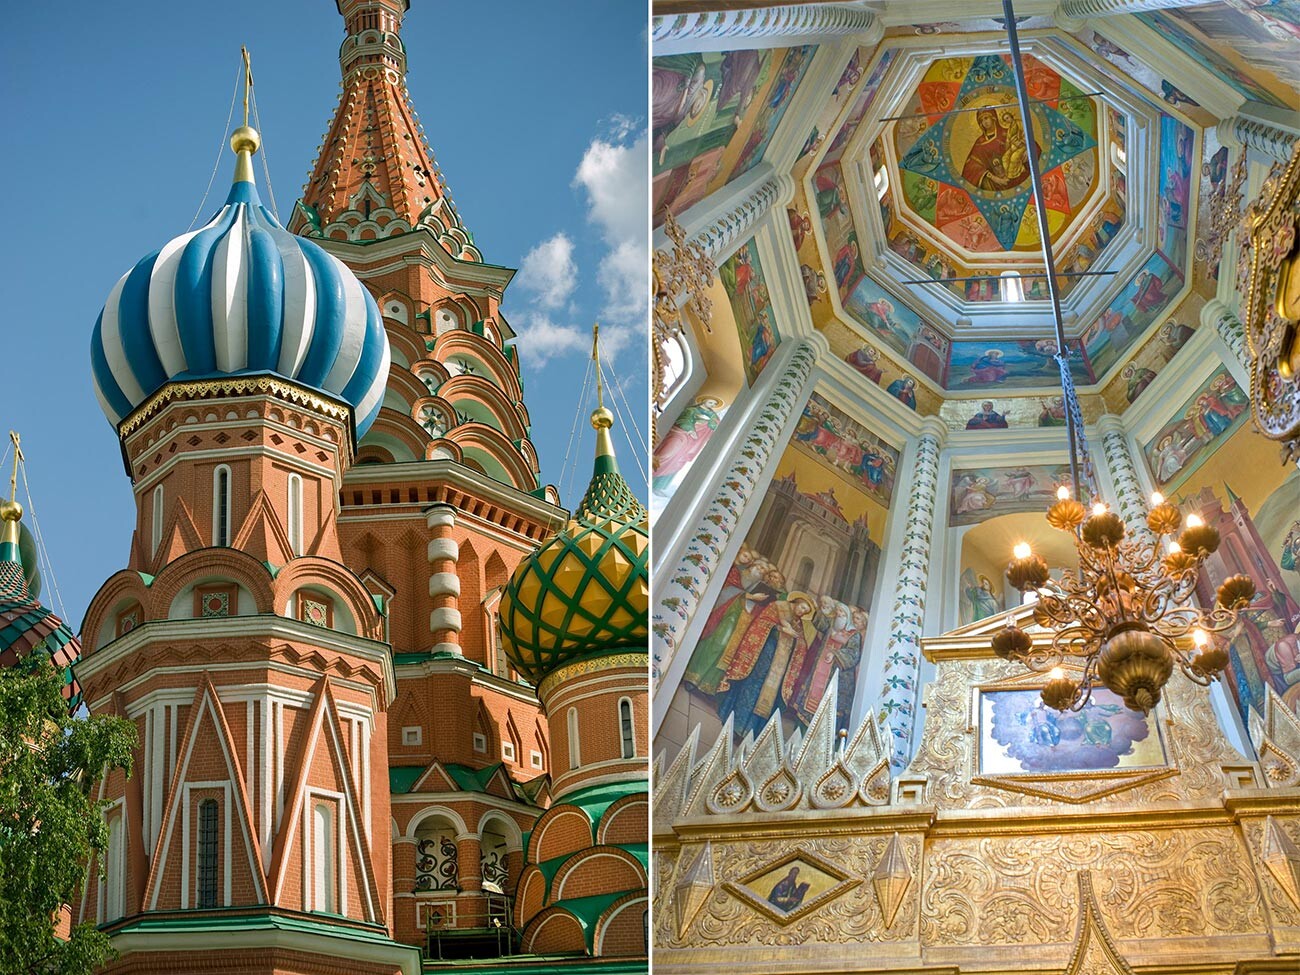 Left: St. Basil's, north view. Church of Sts. Cyprian & Justina. 
Right: St. Basil's, Church of Sts. Cyprian & Justina, interior. View toward dome with 19th-century wall paintings. 2012